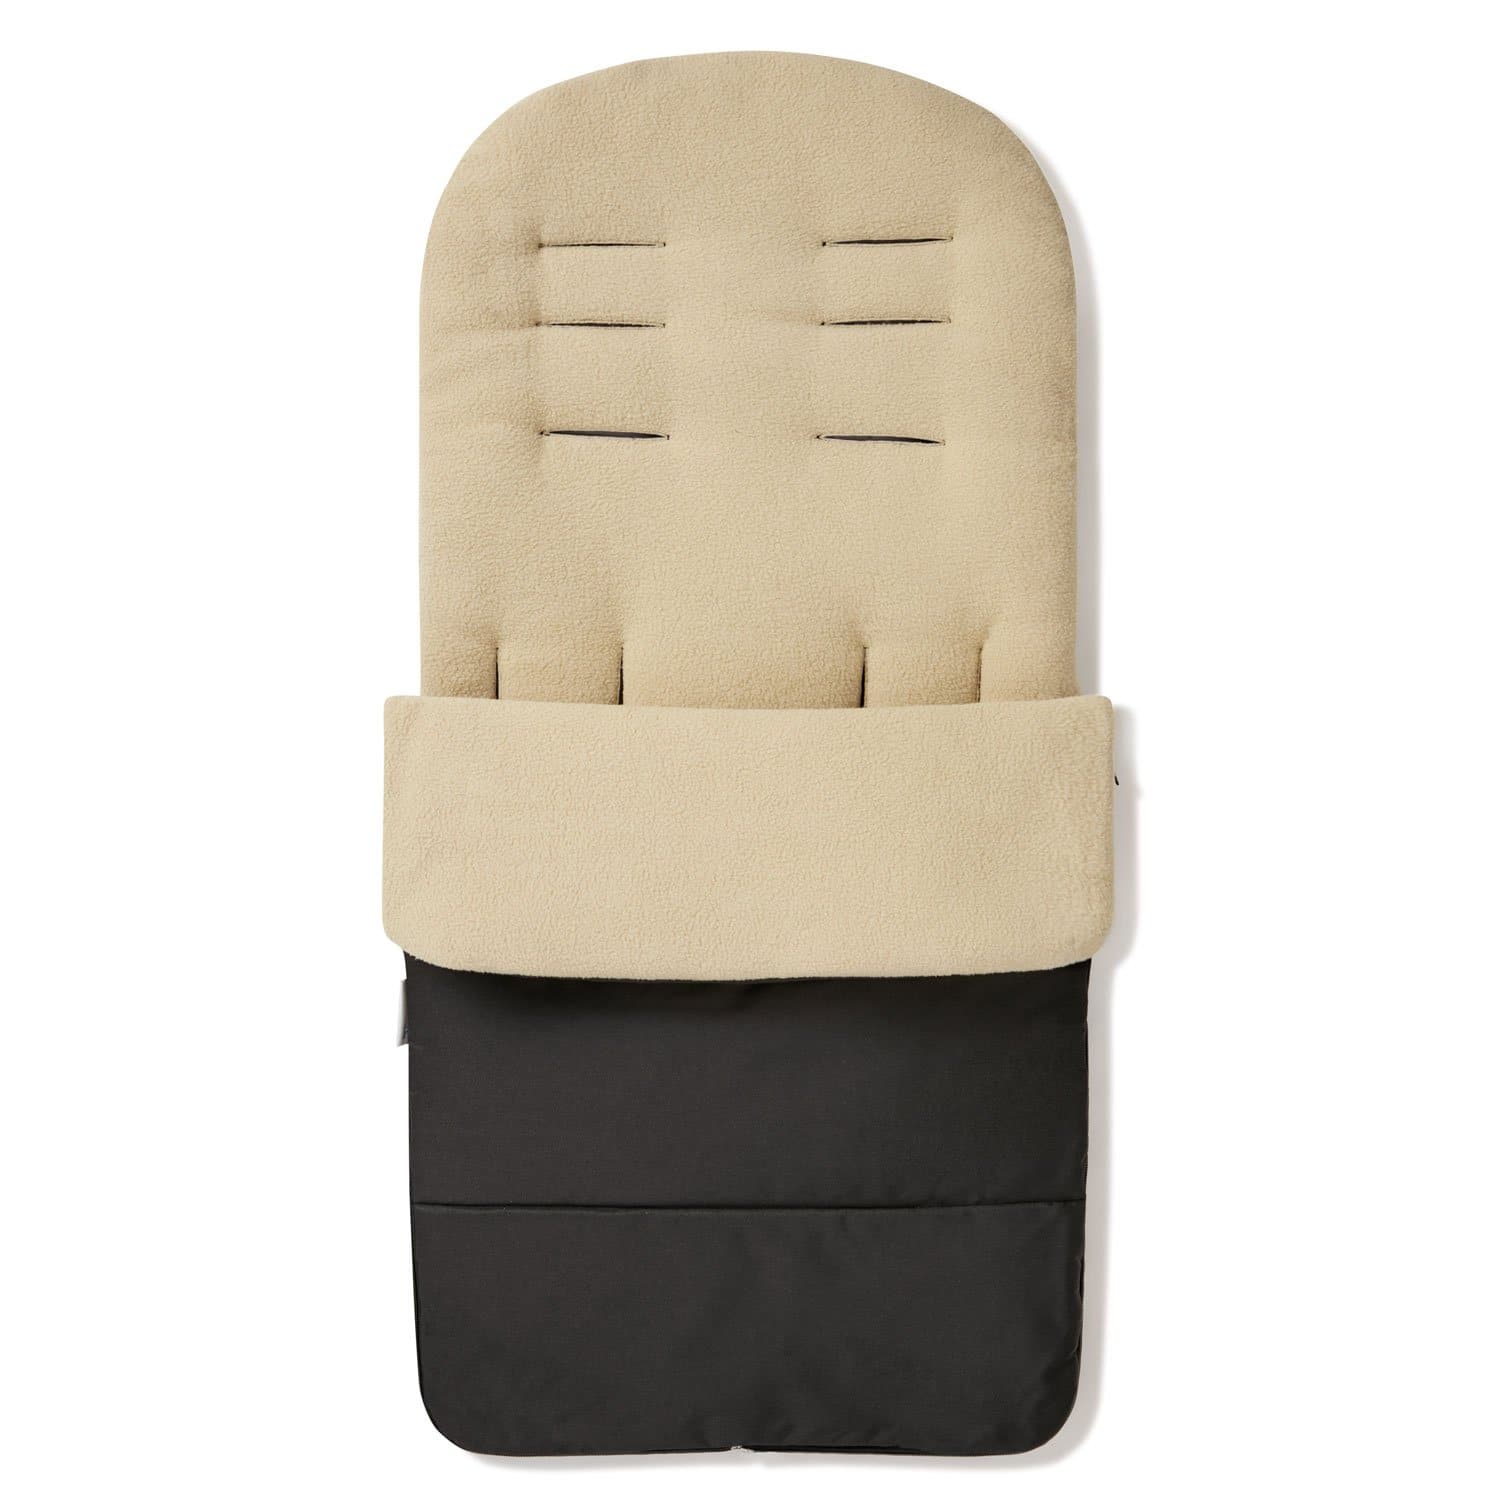 Premium Footmuff / Cosy Toes Compatible with Venicci - Desert Sand / Fits All Models | For Your Little One